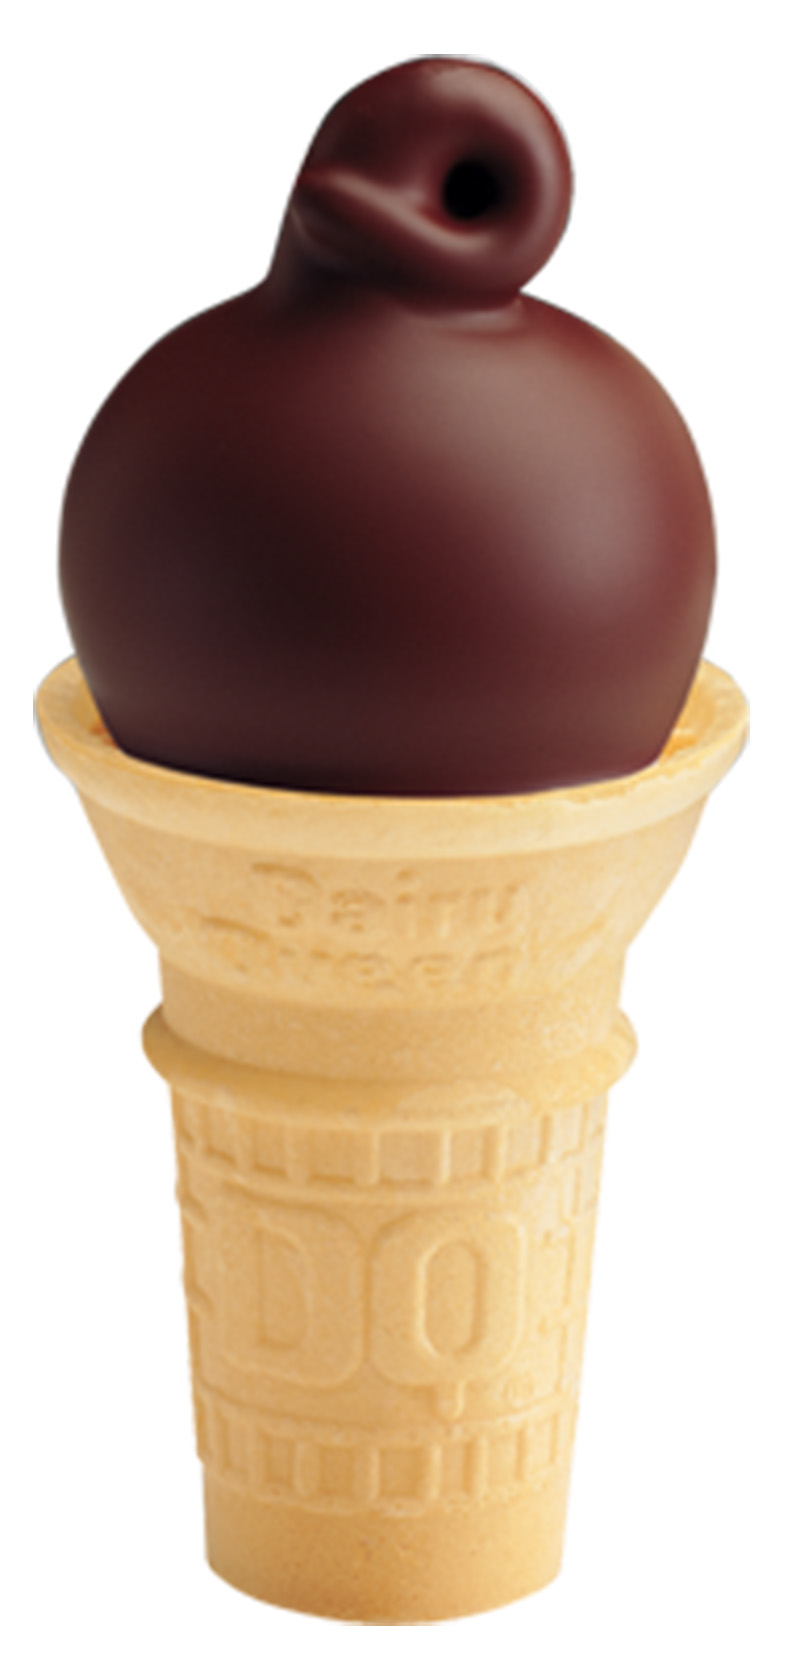 Dairy Queen®, Happy Taste Good 3oz Chocolate Dipped Cone